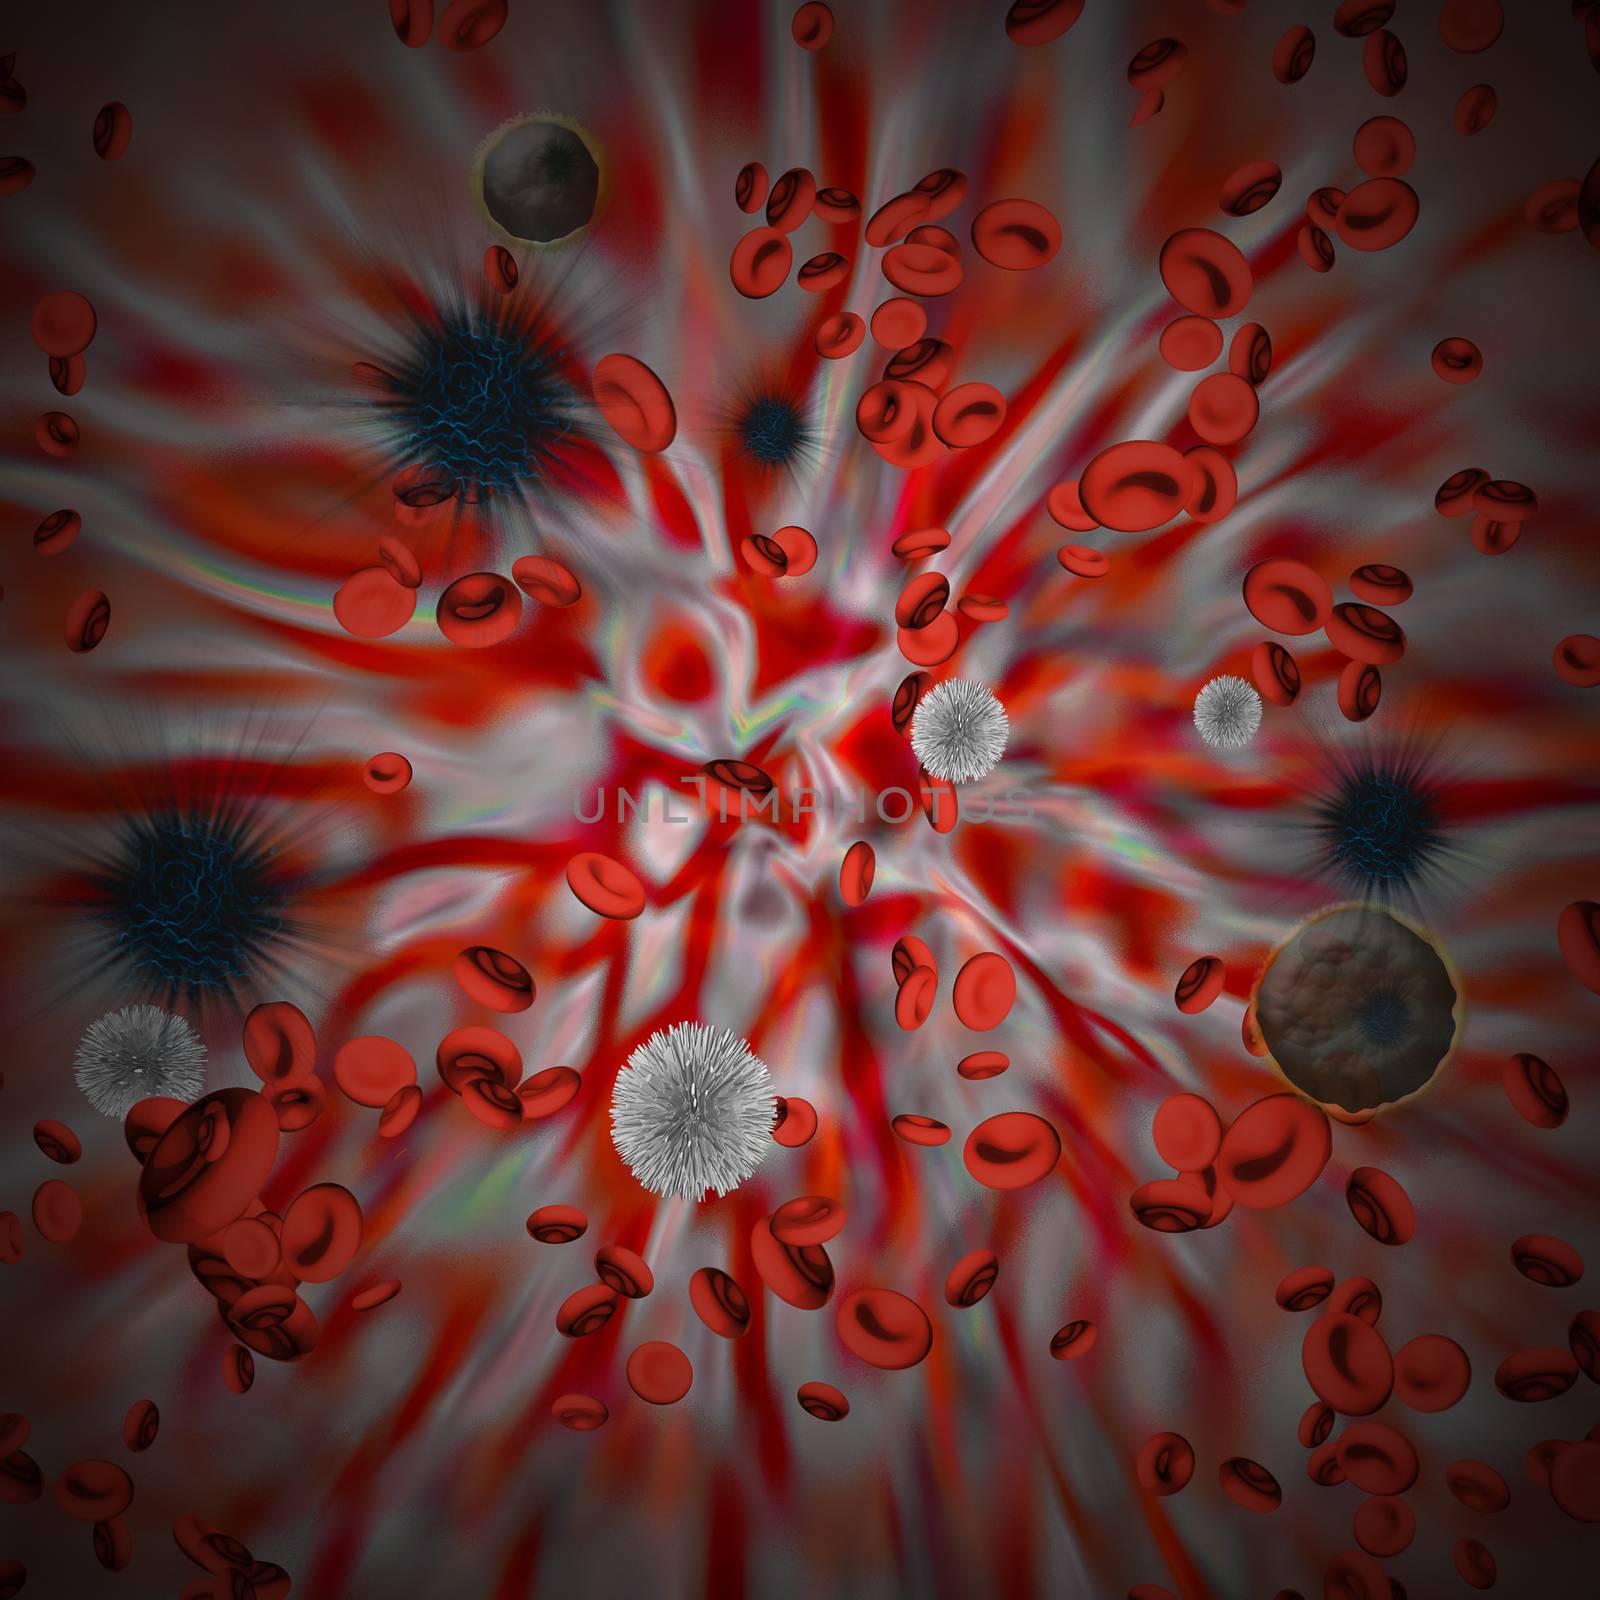 Red blood cells and viruses by applesstock